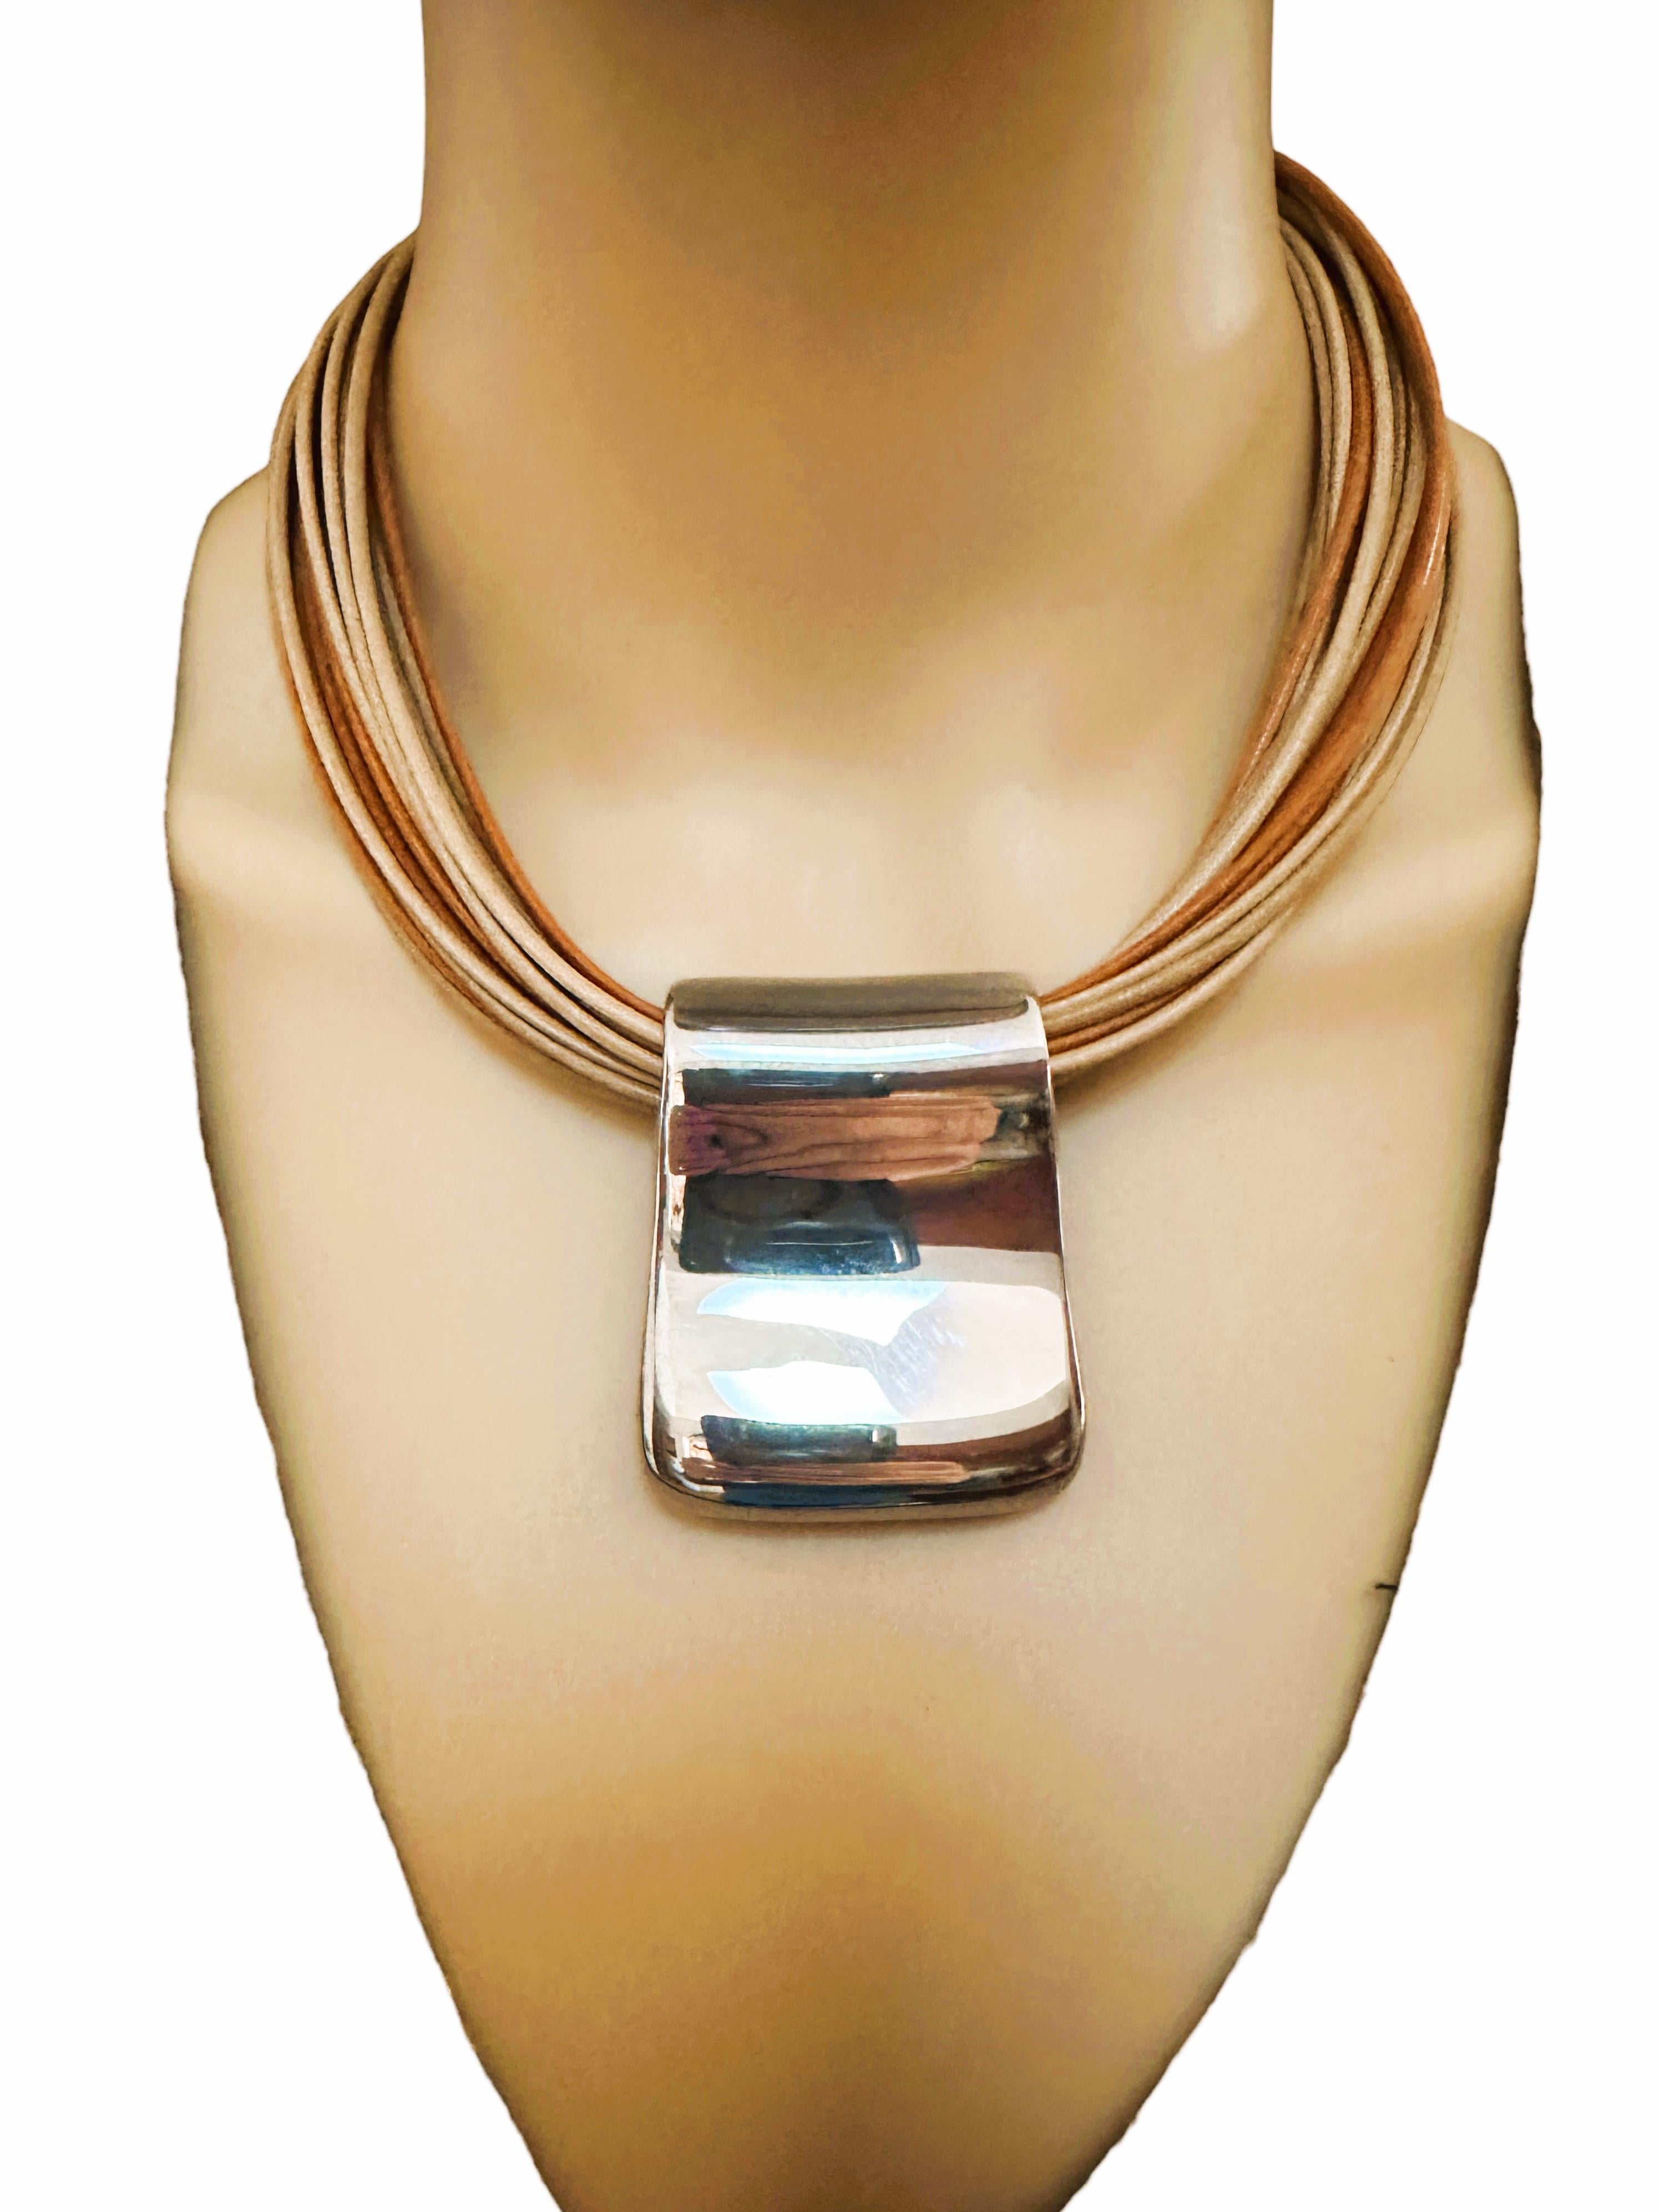 Women's Italian Milor Italy Leather Strand Necklace with Sterling Pendant